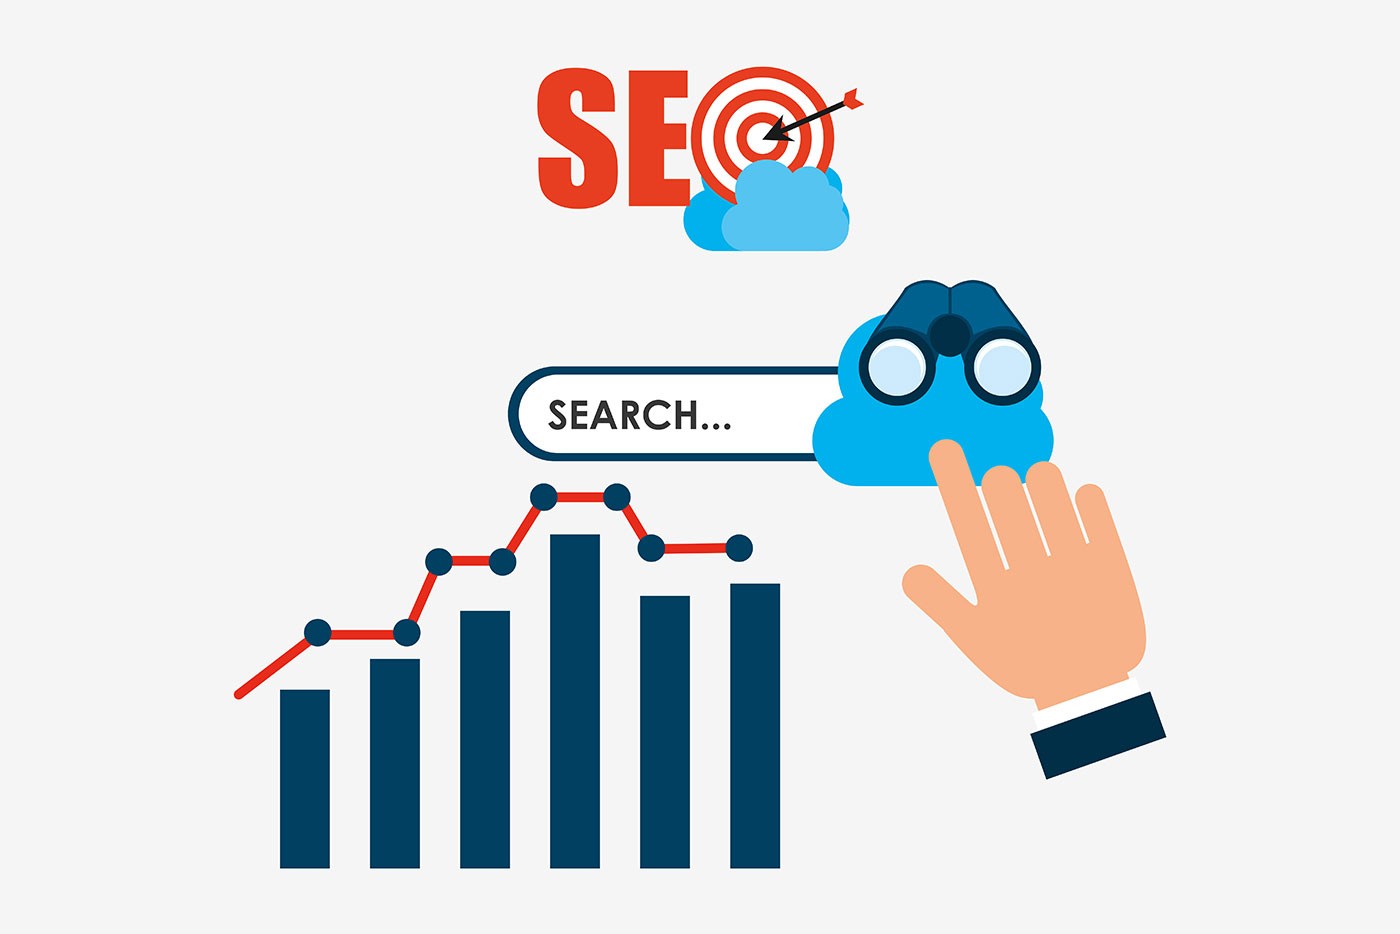 How to optimize for search engines